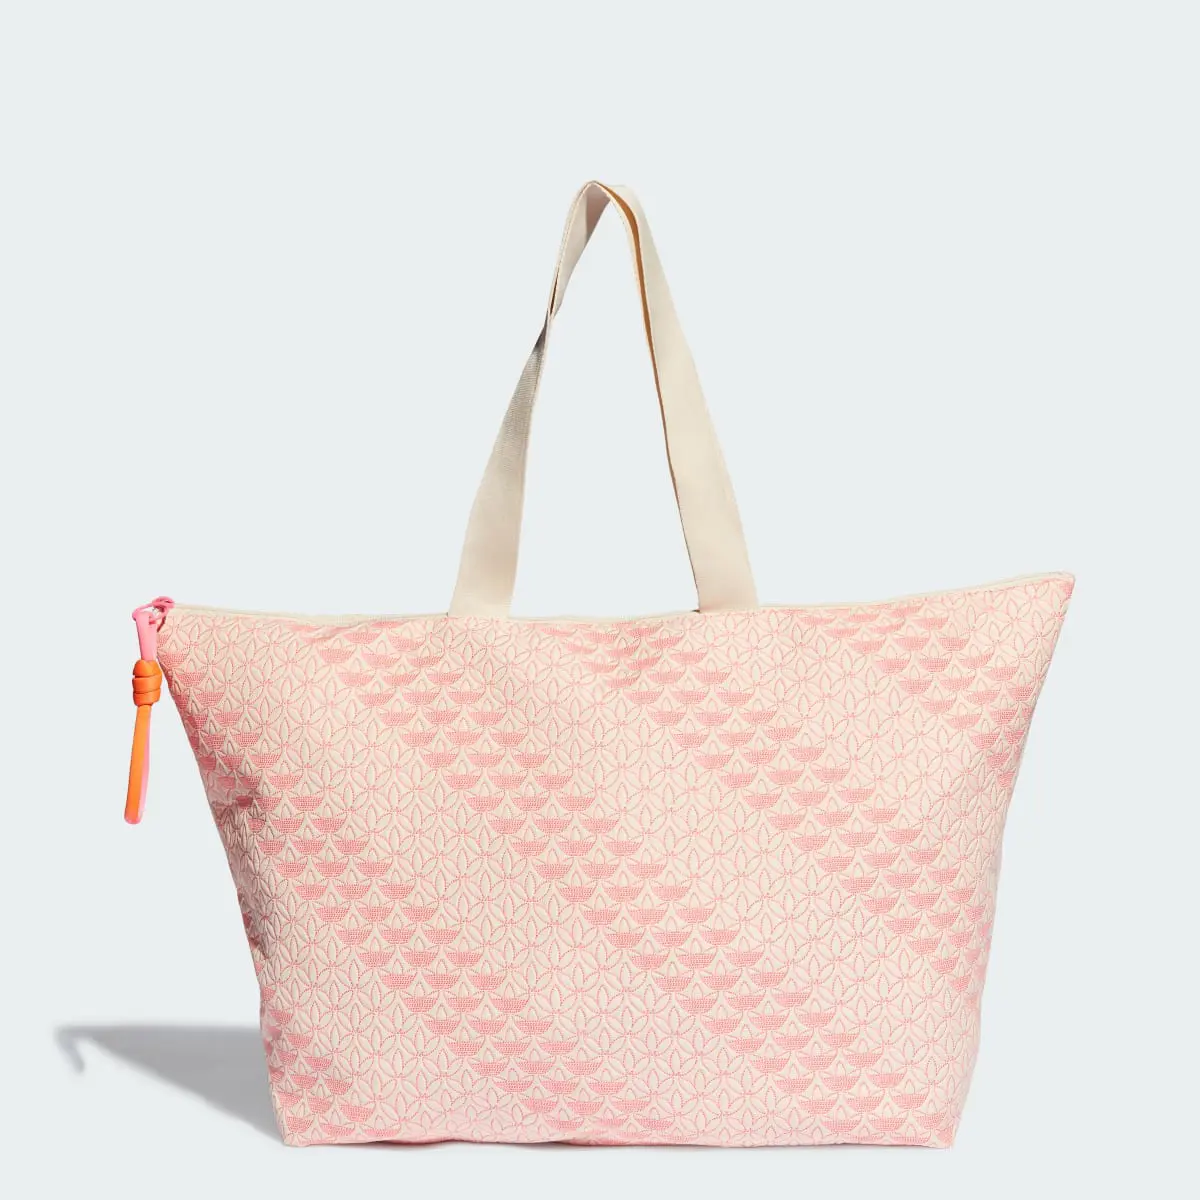 Adidas Bolso Shopper Quilted Trefoil. 1